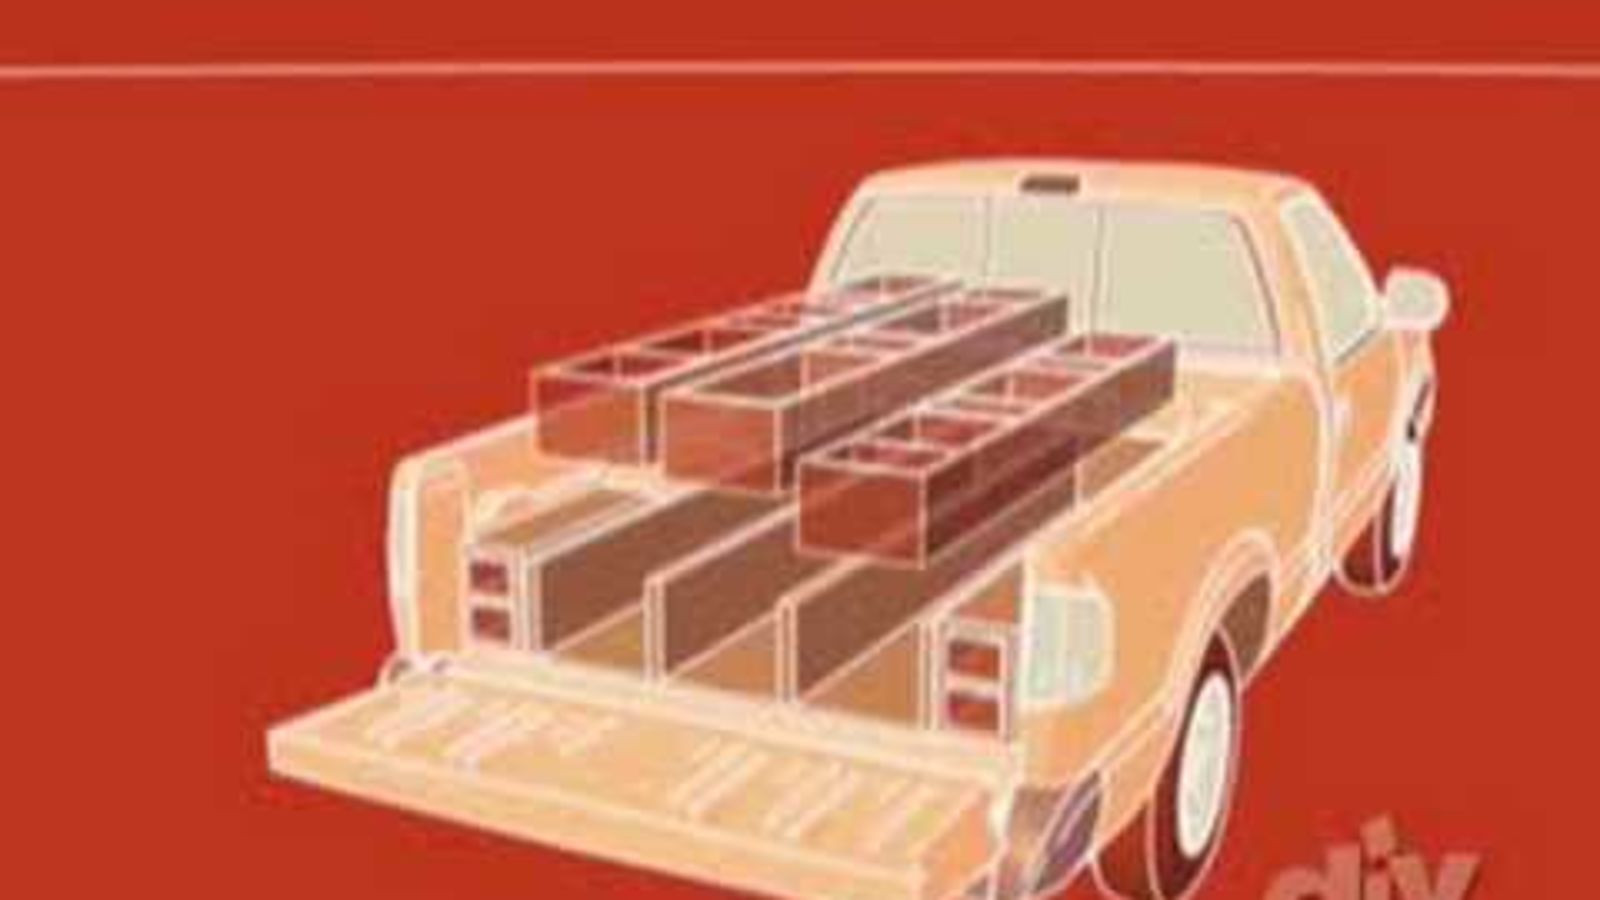 DIY Truck Bed Organizer
 Maximize Your Truck Bed with a DIY Storage System